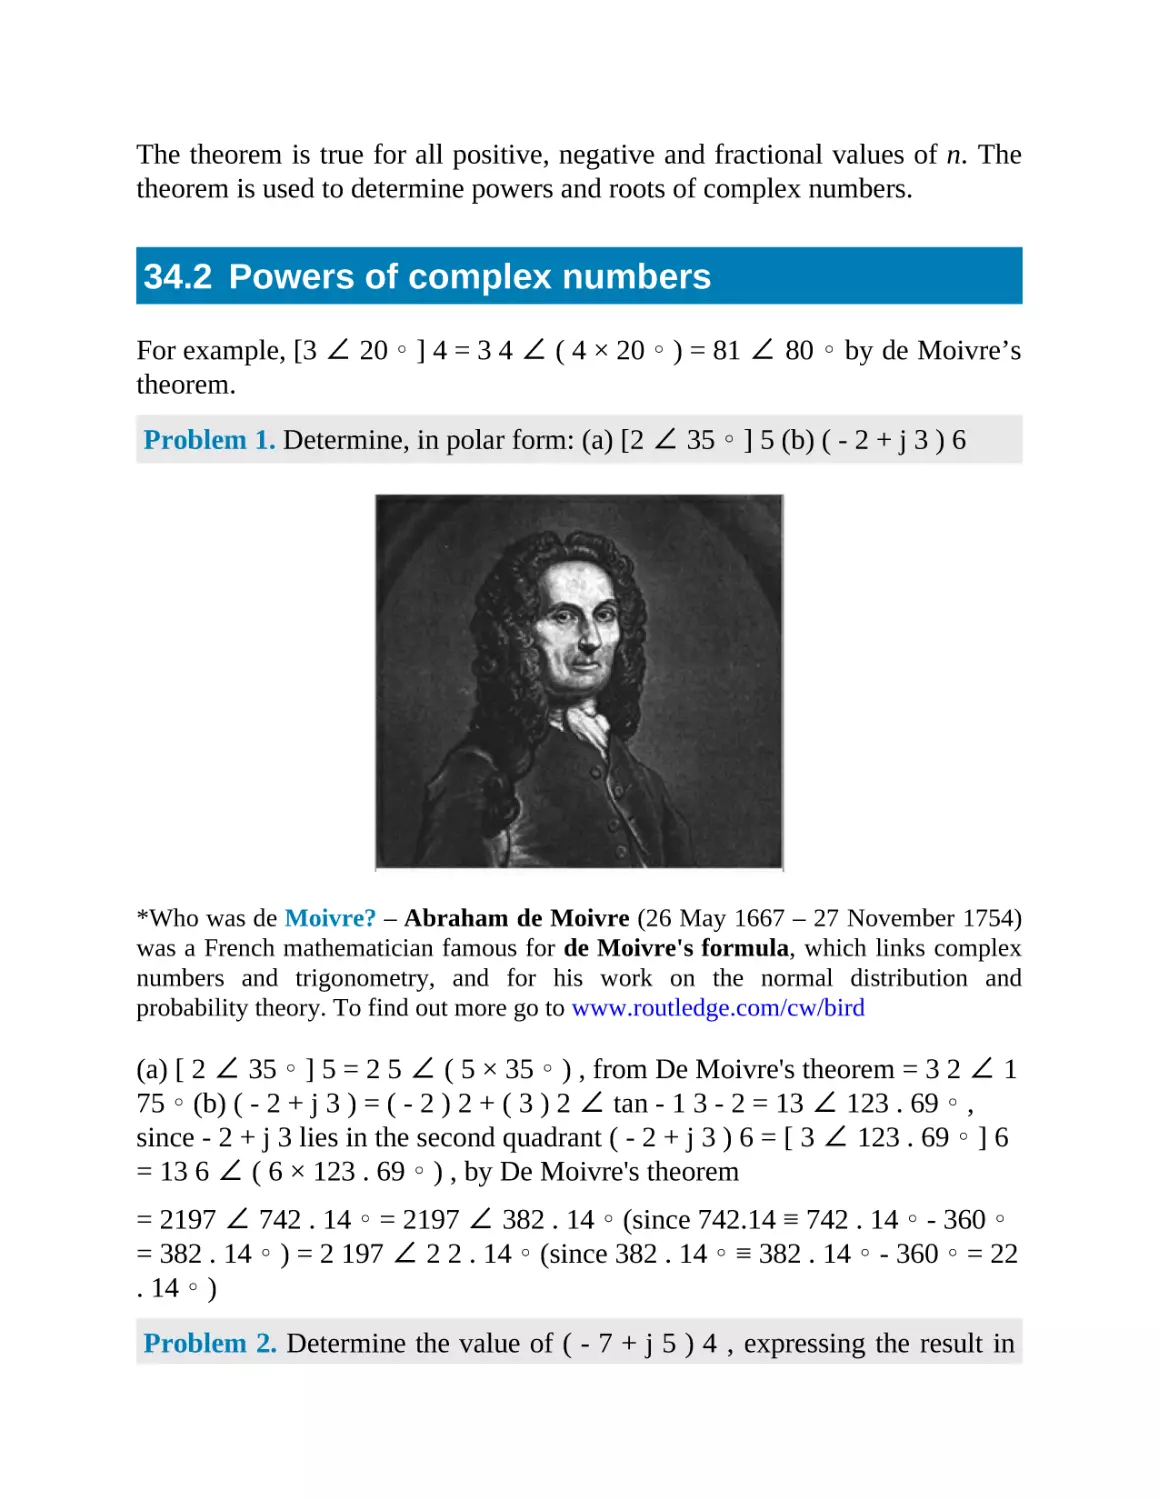 34.2 Powers of complex numbers